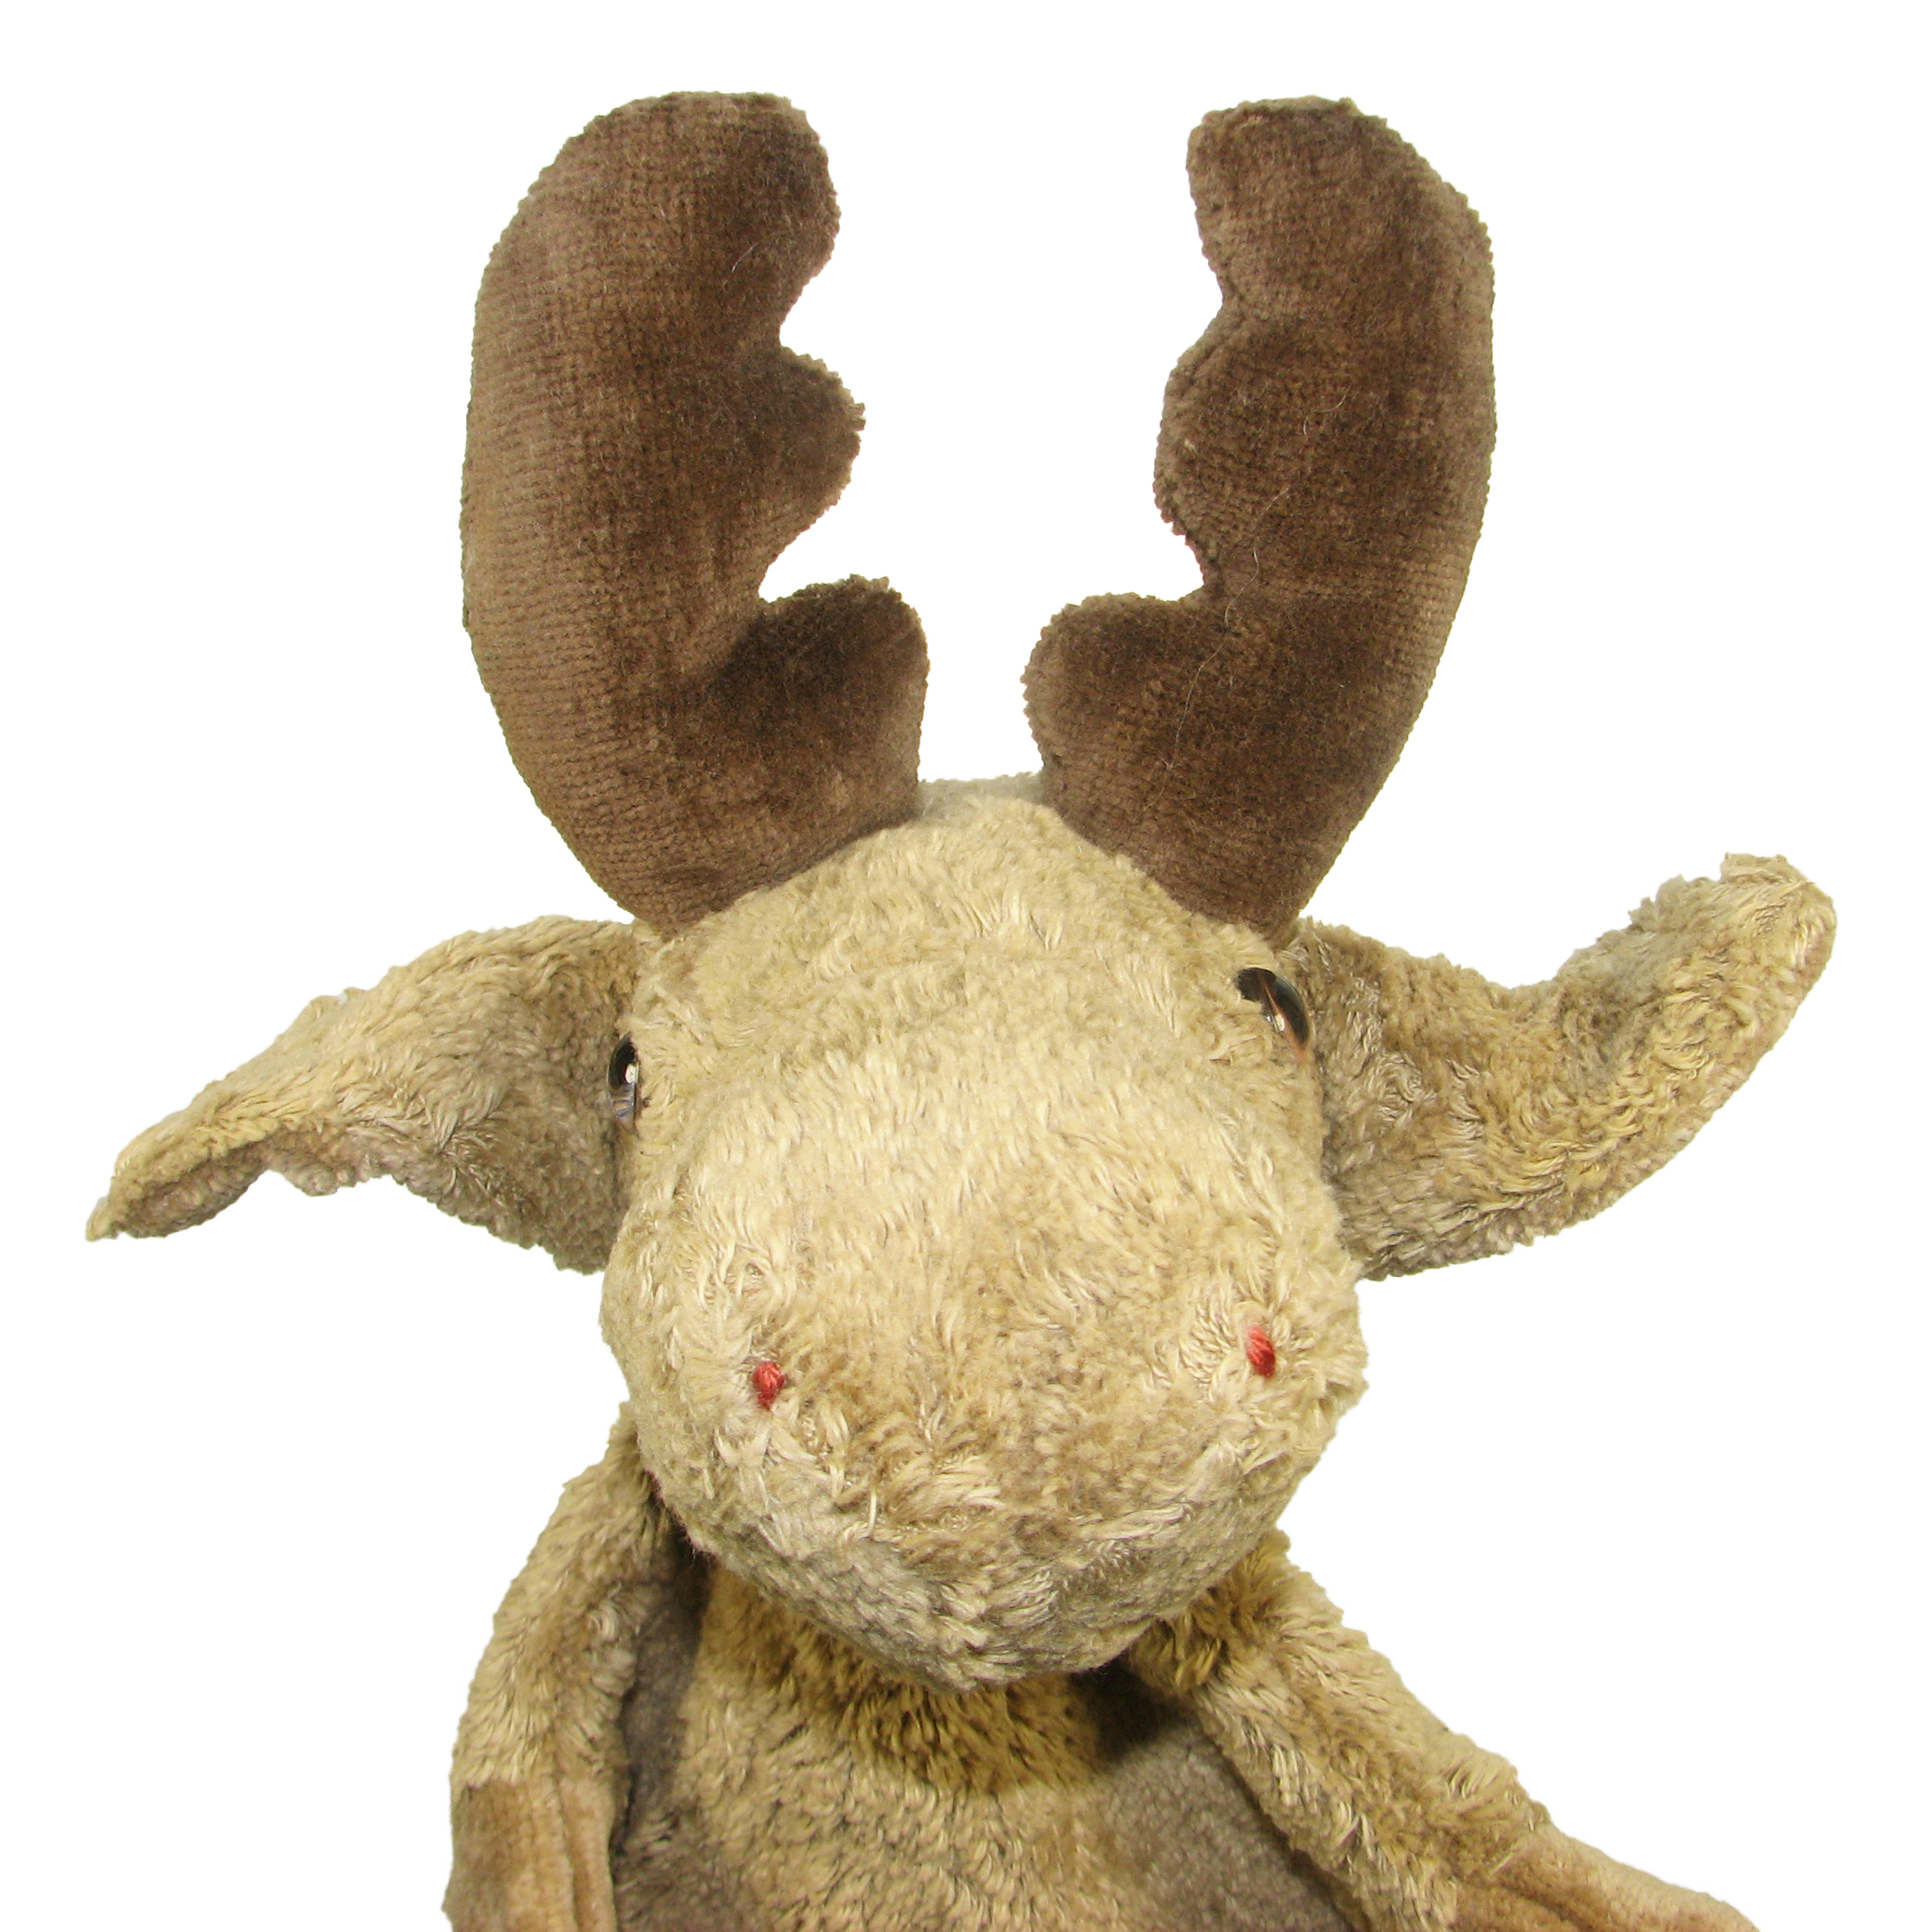 Hand puppet moose - made of natural material - by Kallisto